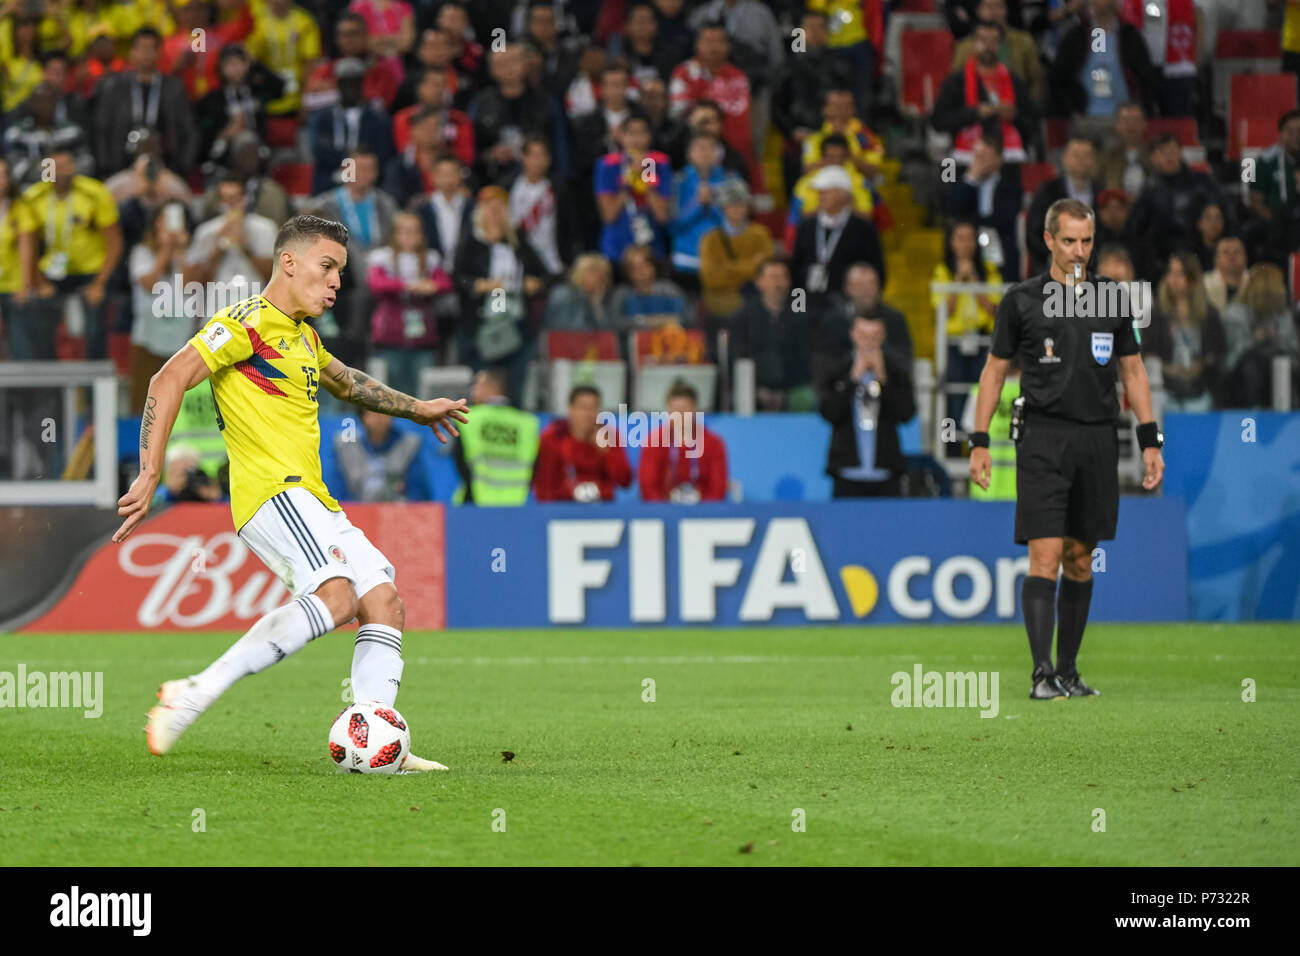 Moscow, Russia. July 03, 2018: Mateus Uribe of Colombia missing his penalty.at Spartak Stadium during the round of 16 match between England and Colombia during the 2018 World Cup. Ulrik Pedersen/CSM Credit: Cal Sport Media/Alamy Live News Stock Photo